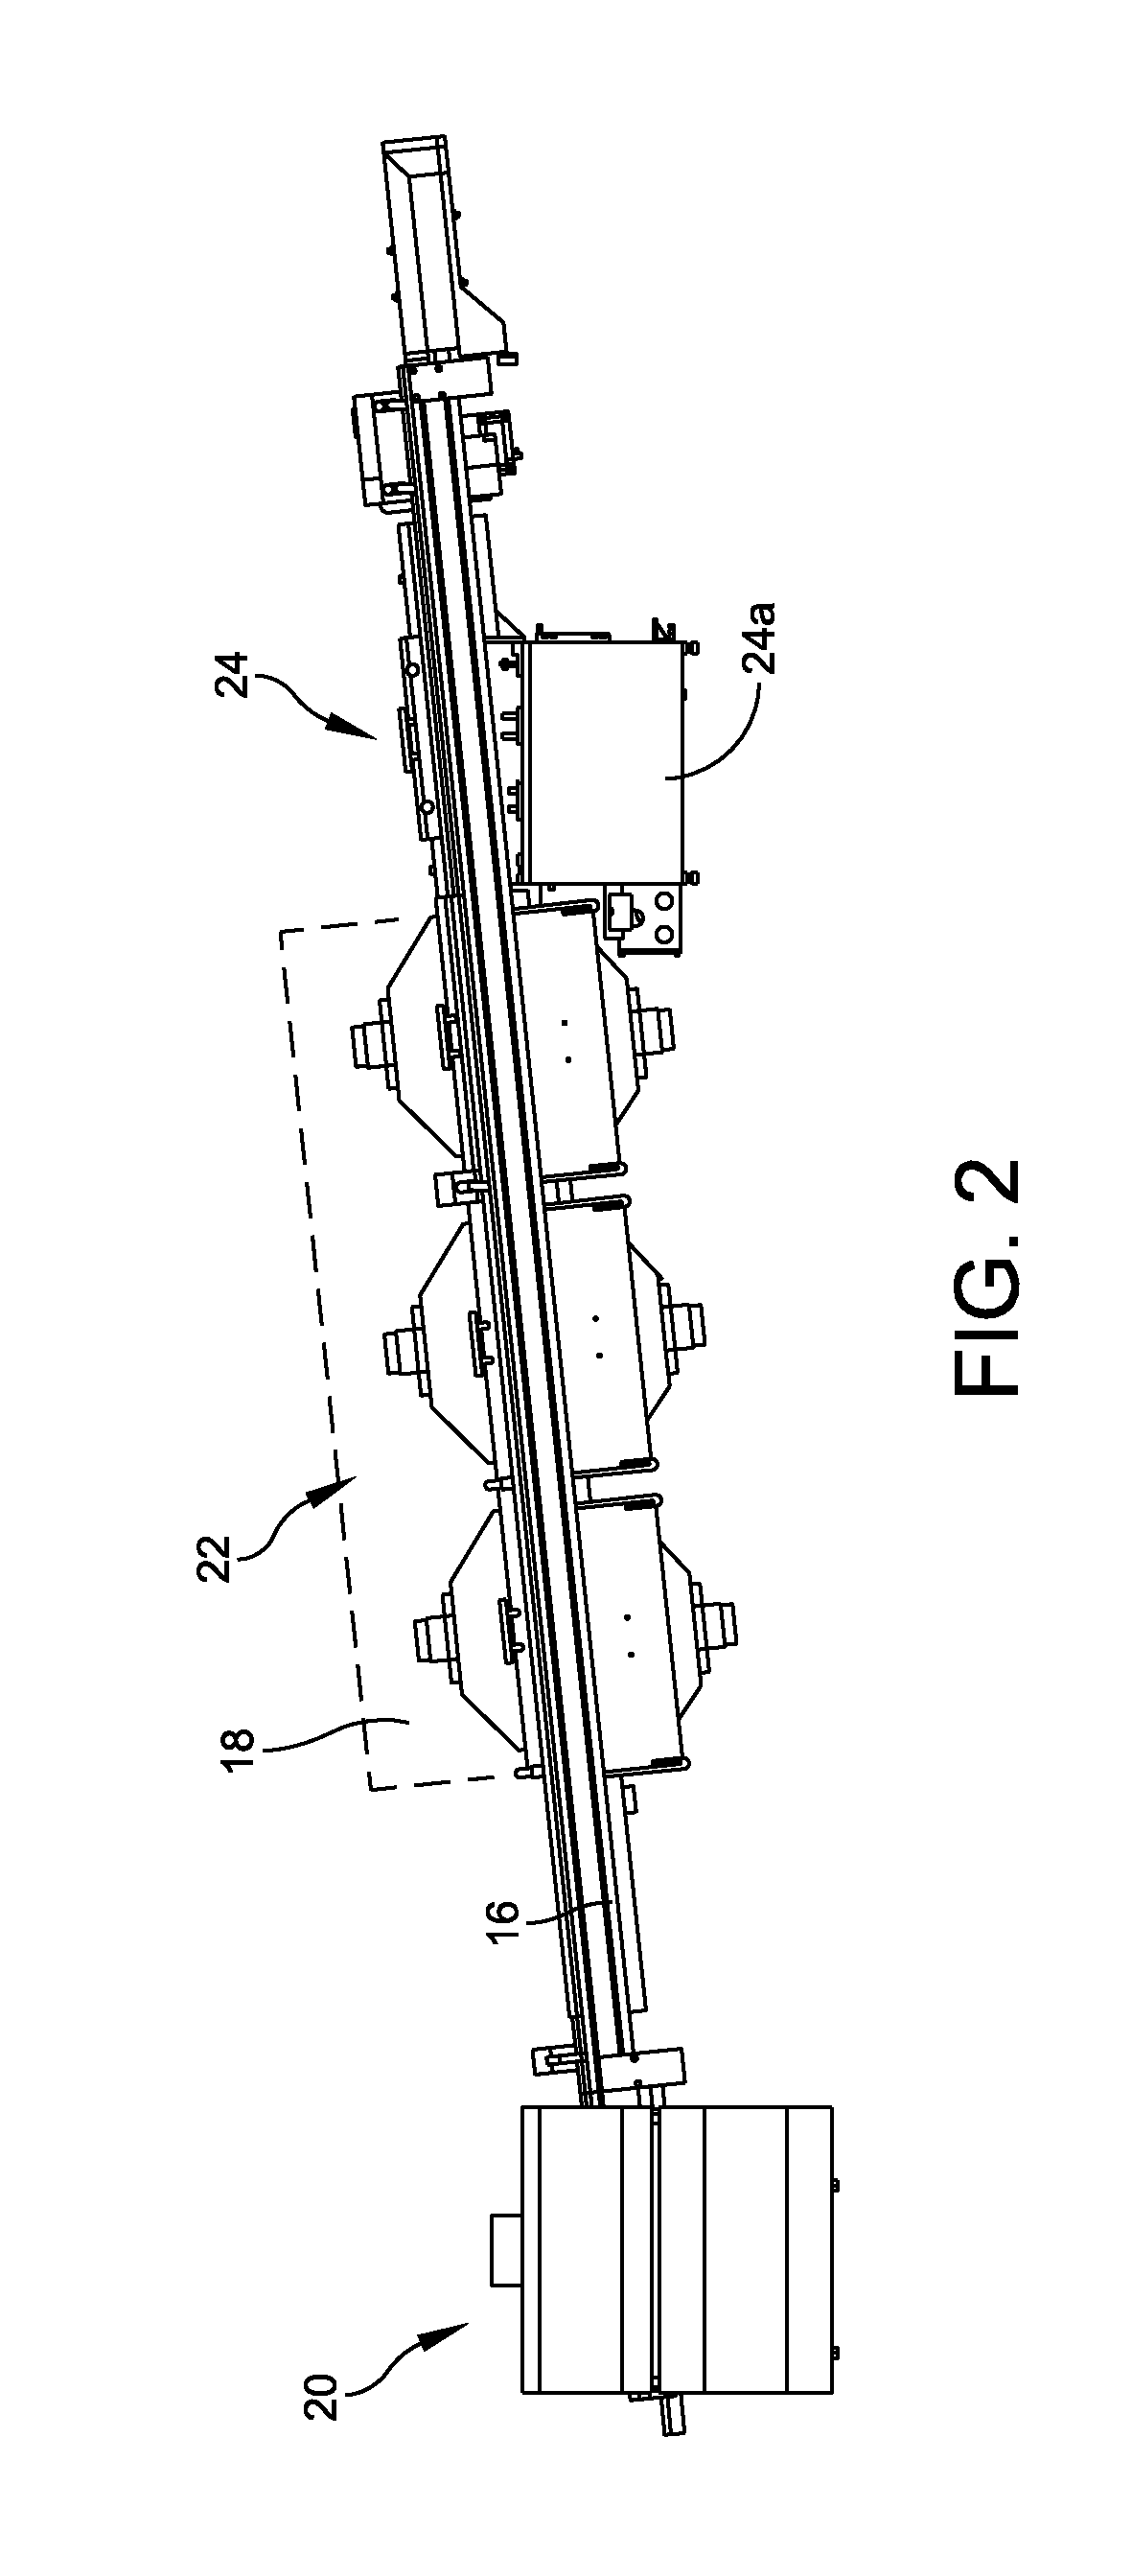 Pre-heater latch and seal mechanism for wave solder machine and related method